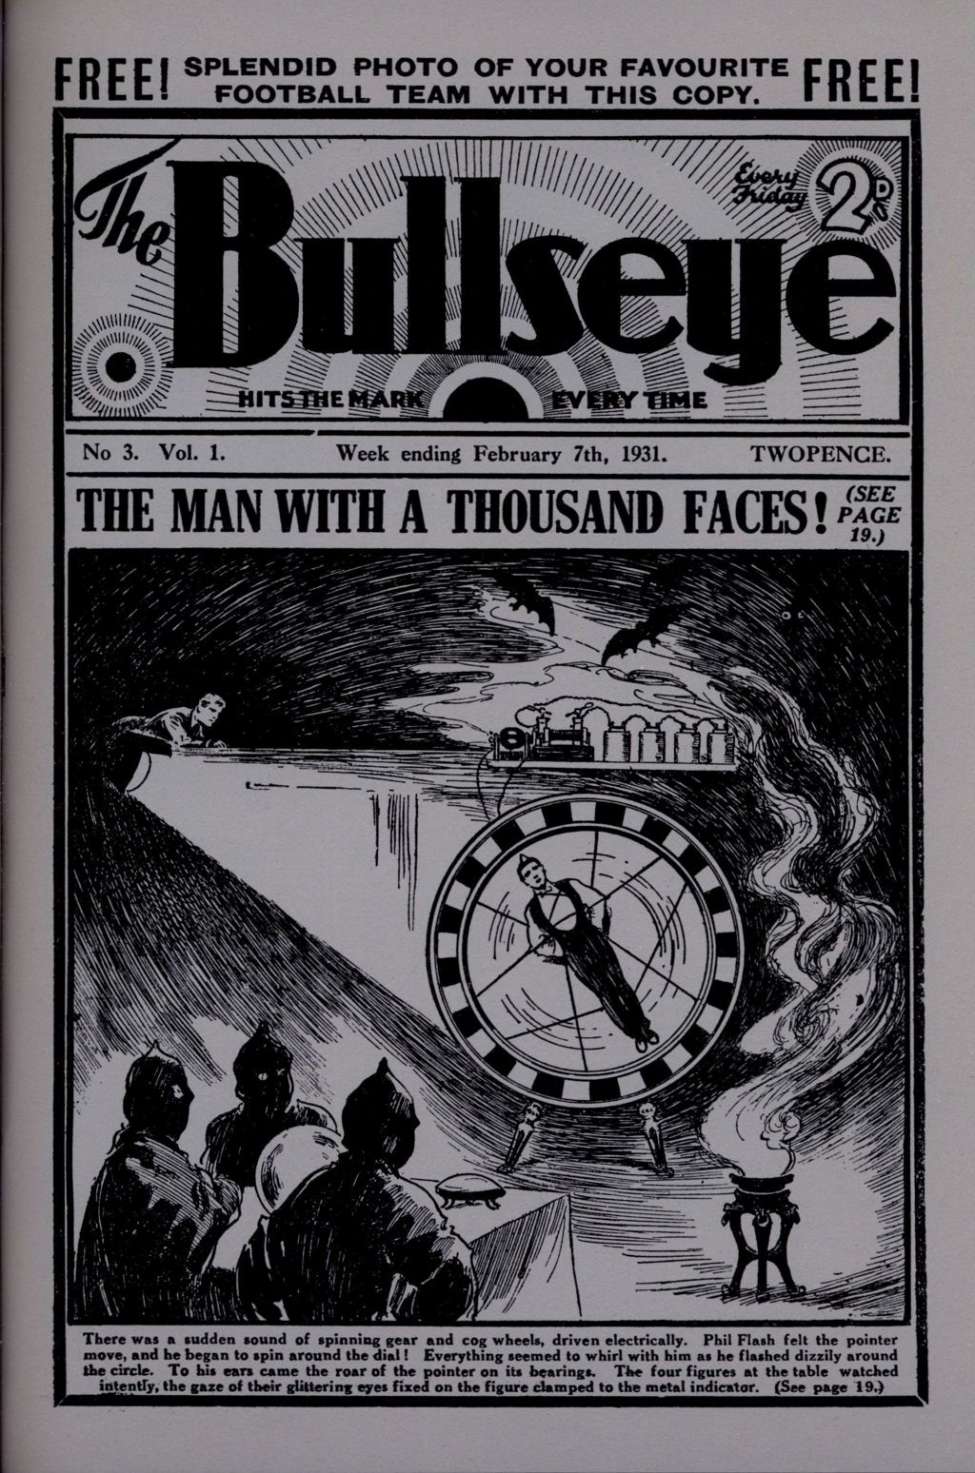 Comic Book Cover For The Bullseye v1 3 - The Man with A Thousand Faces!